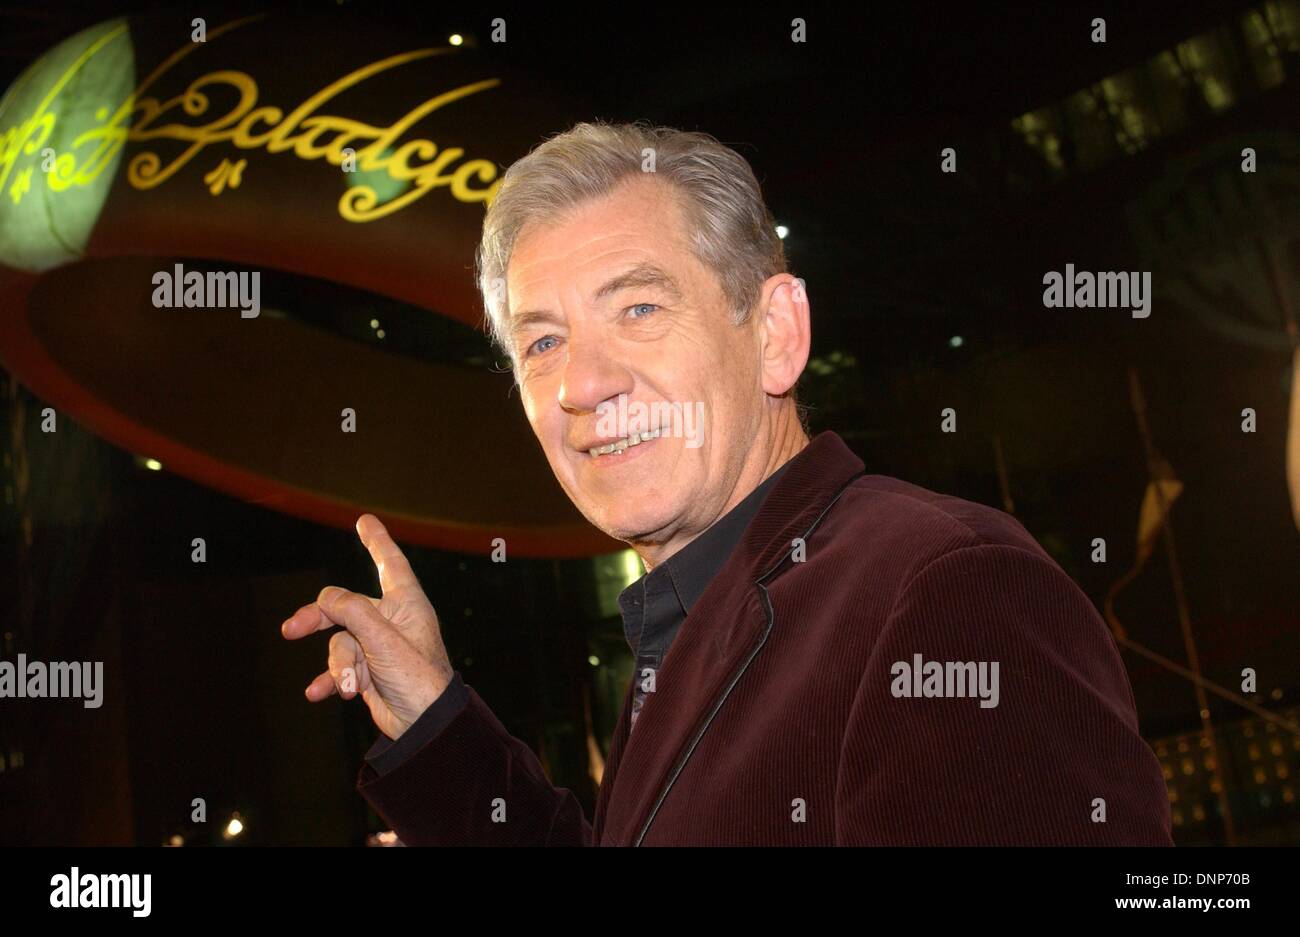 Sir Ian McKellen (Gandalf) at the European premiere of 'The Lord of the Rings - The Return of the King' in Berlin. Stock Photo